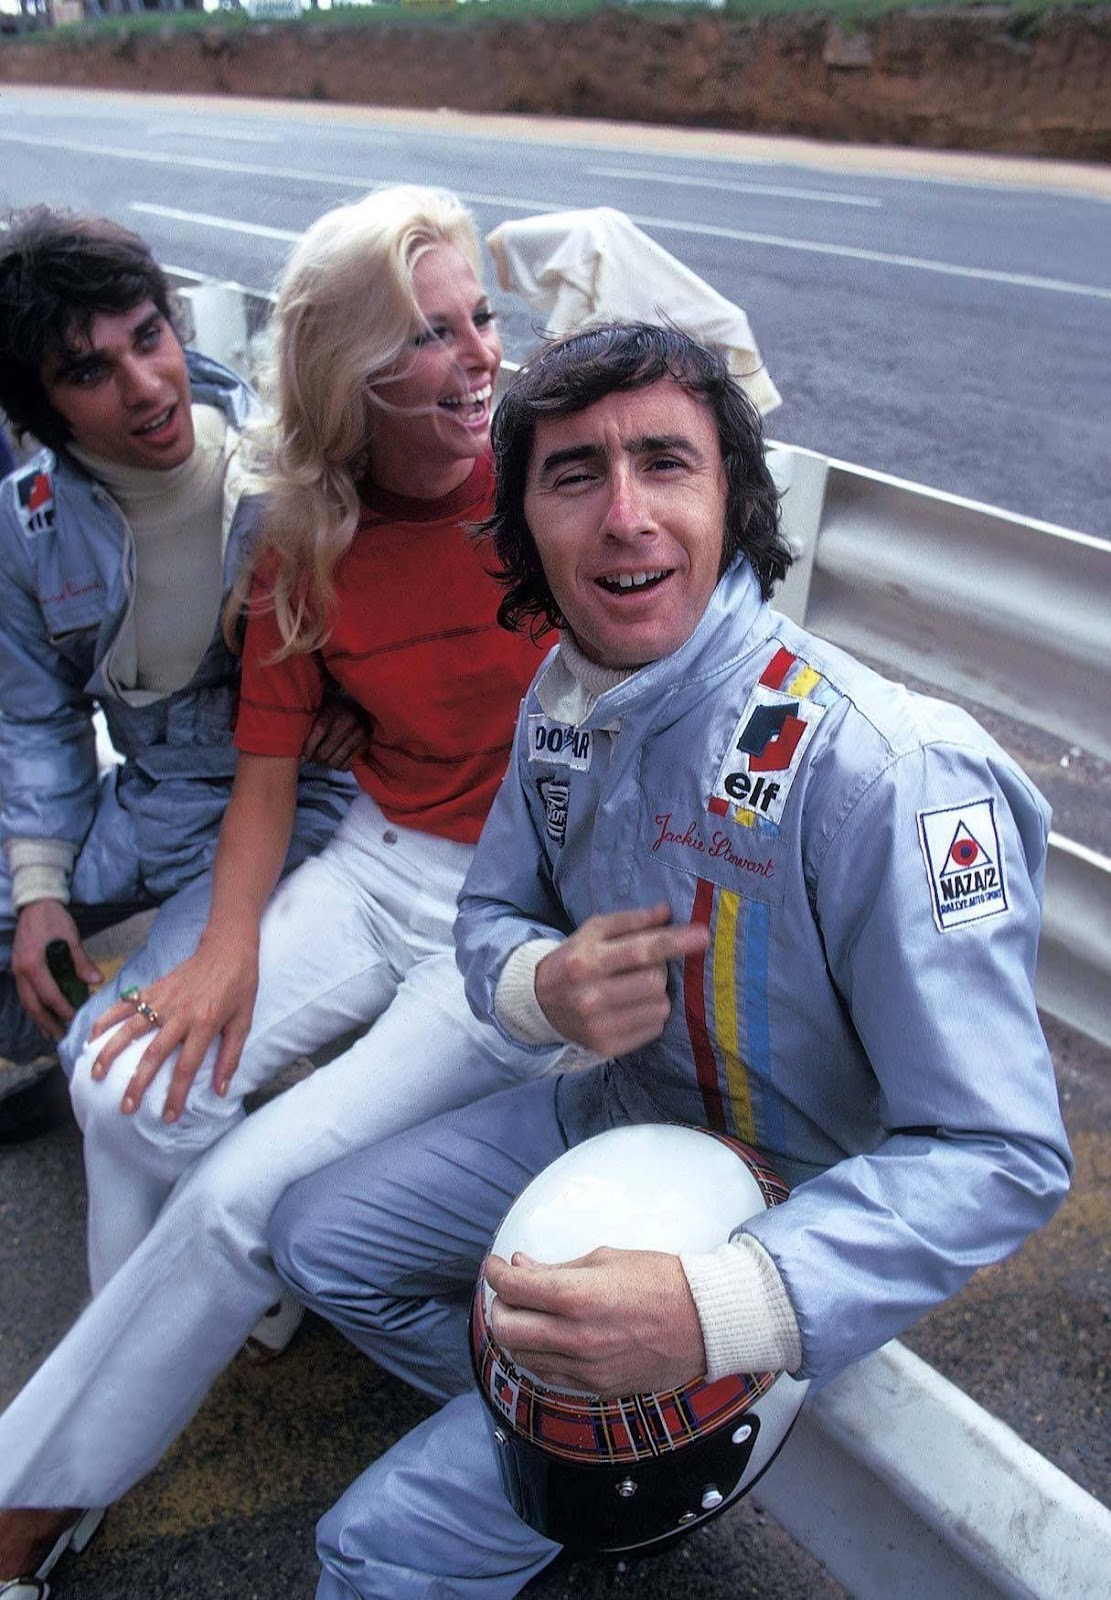 Jackie Stewart with Francois Cevert and a girl.